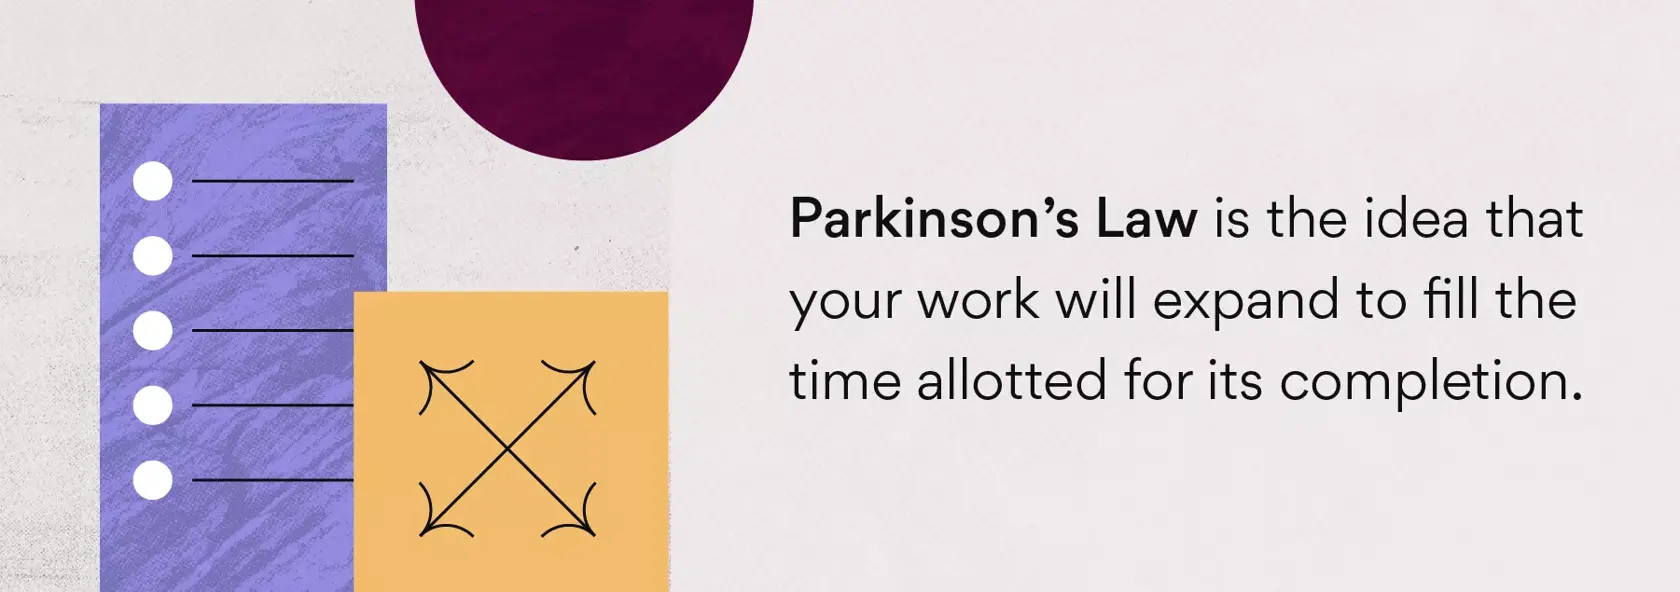 [Inline illustration] What is Parkinson's law? (Infographic)